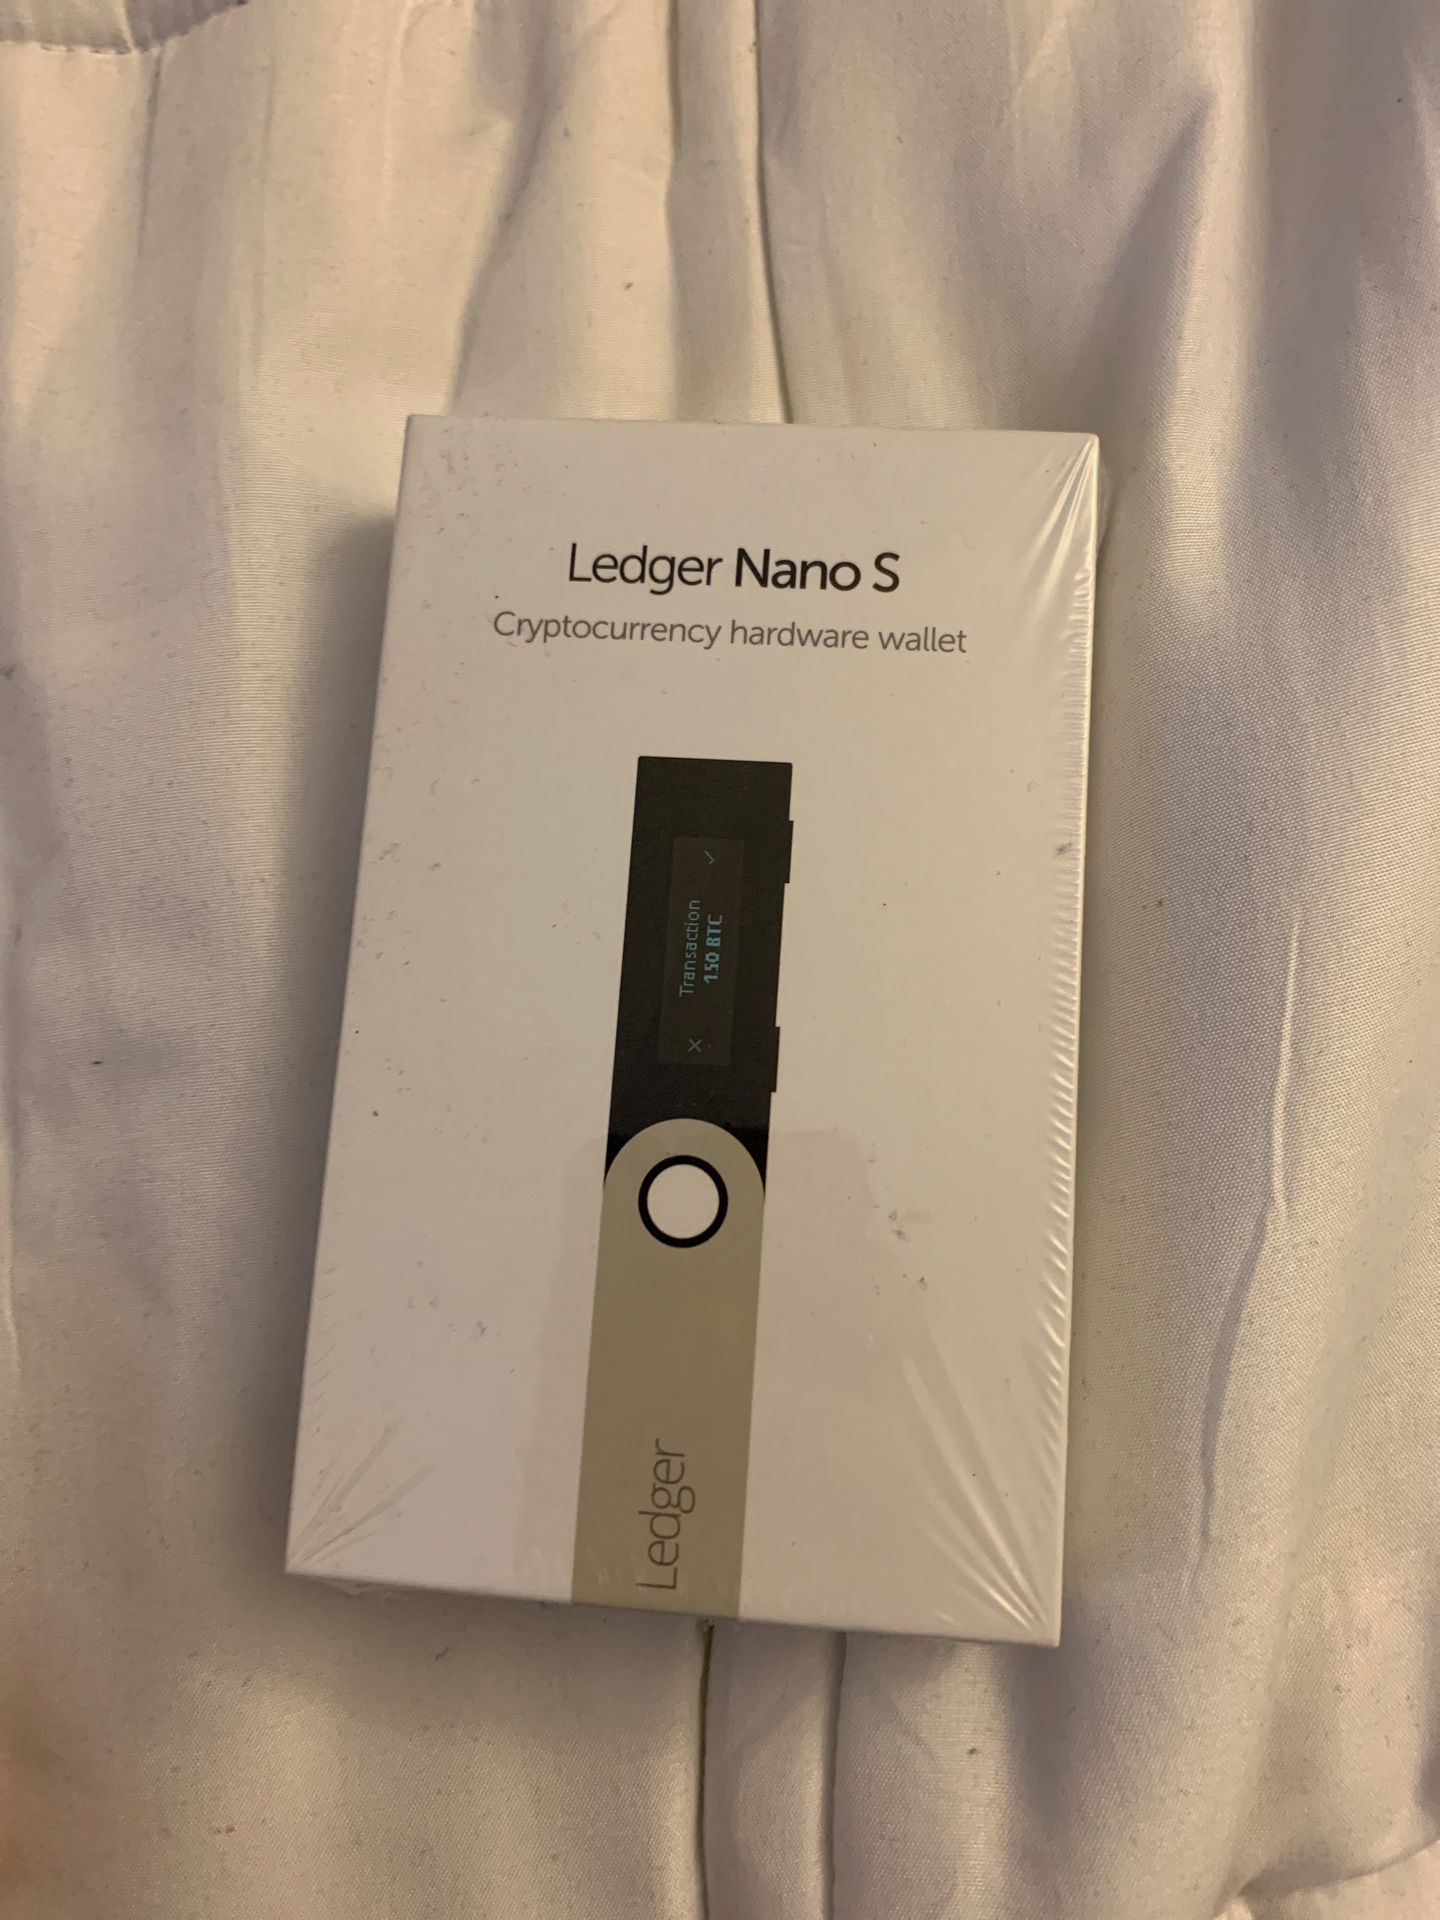 Ledger Nano S cryptocurrency hardware wallet brand new factory sealed